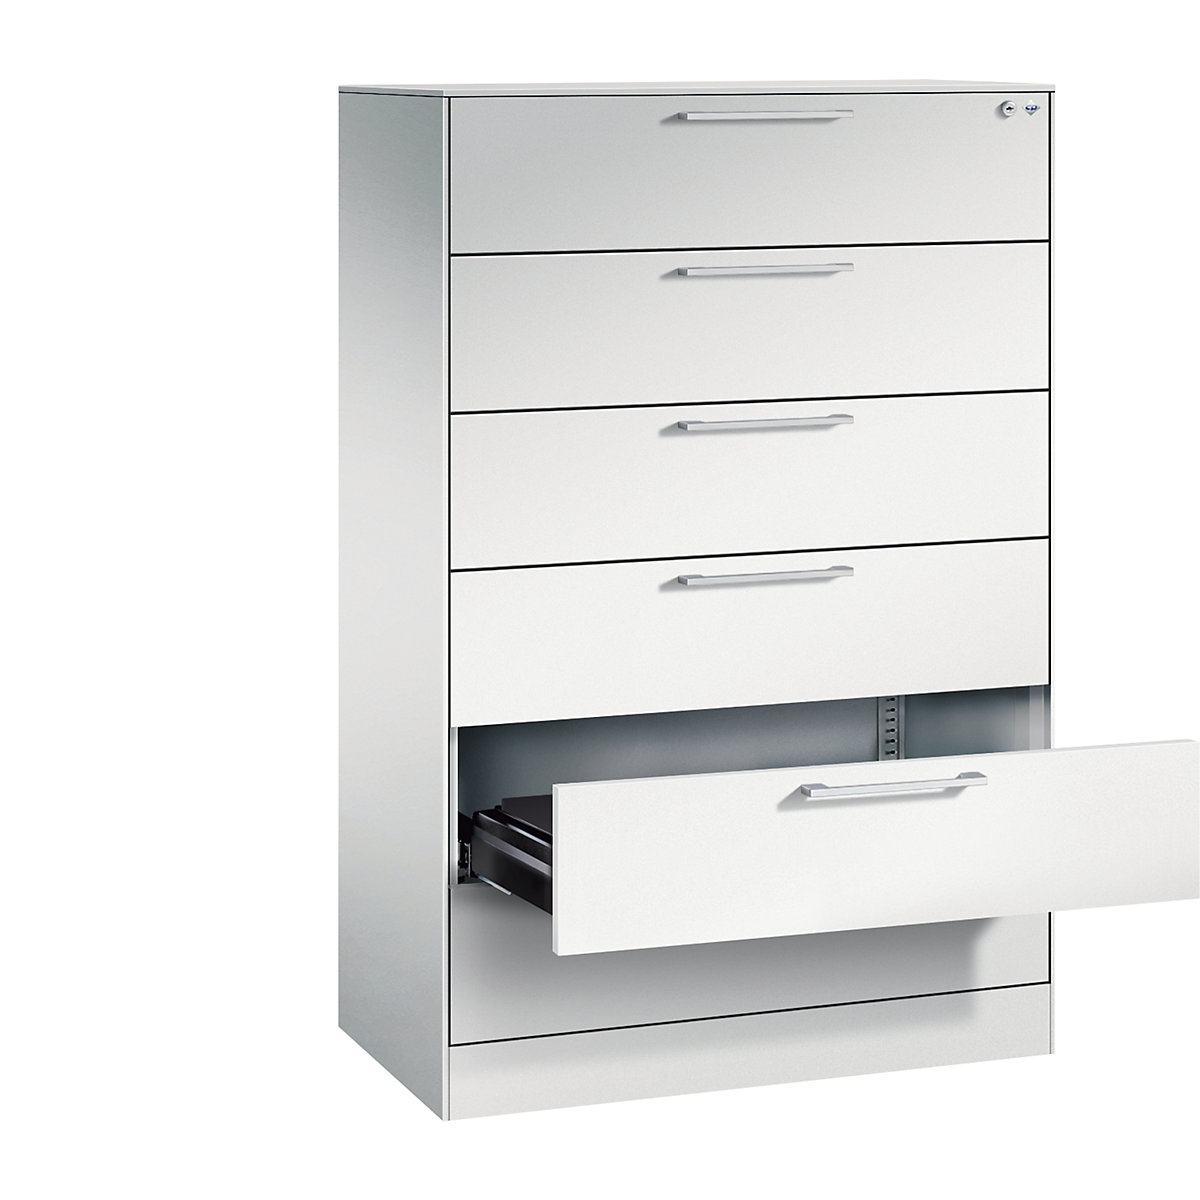 ASISTO card file cabinet – C+P, height 1292 mm, with 6 drawers, A5 landscape, light grey/light grey-12